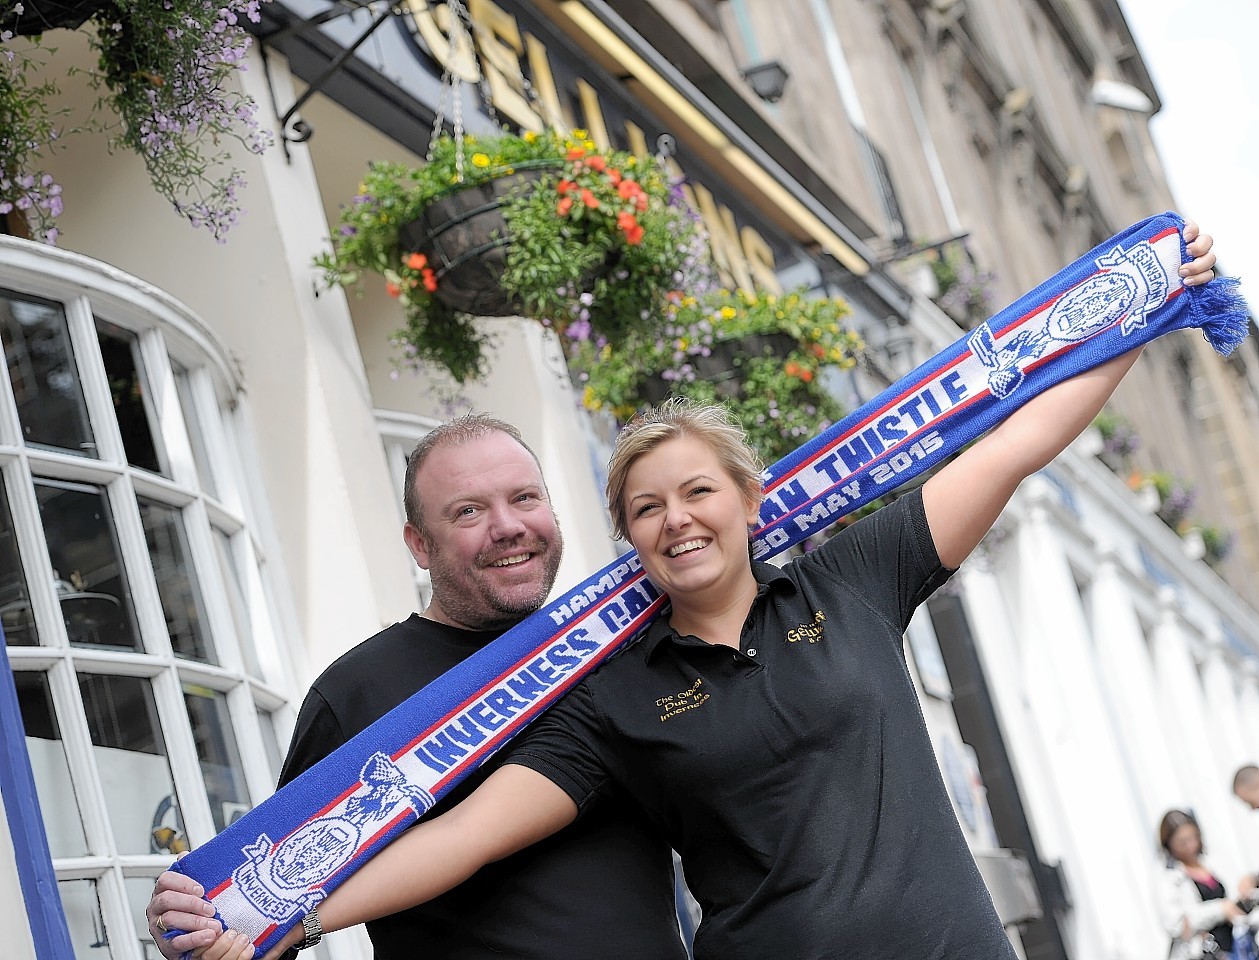 Licencee of the Gellions in Bridge Street, Inverness, Rory Munro with supervisor Kirstie Hardie 